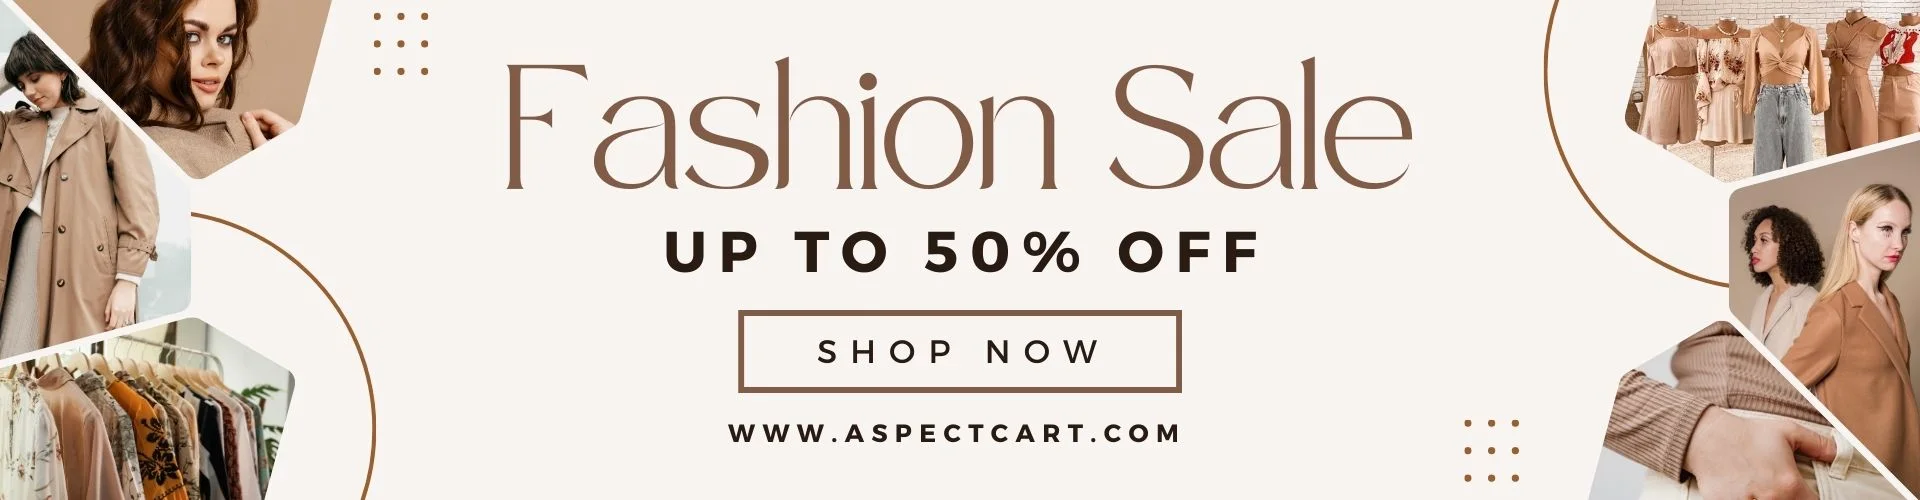 Fashion Clothing Sale Banner at an Online E-shop